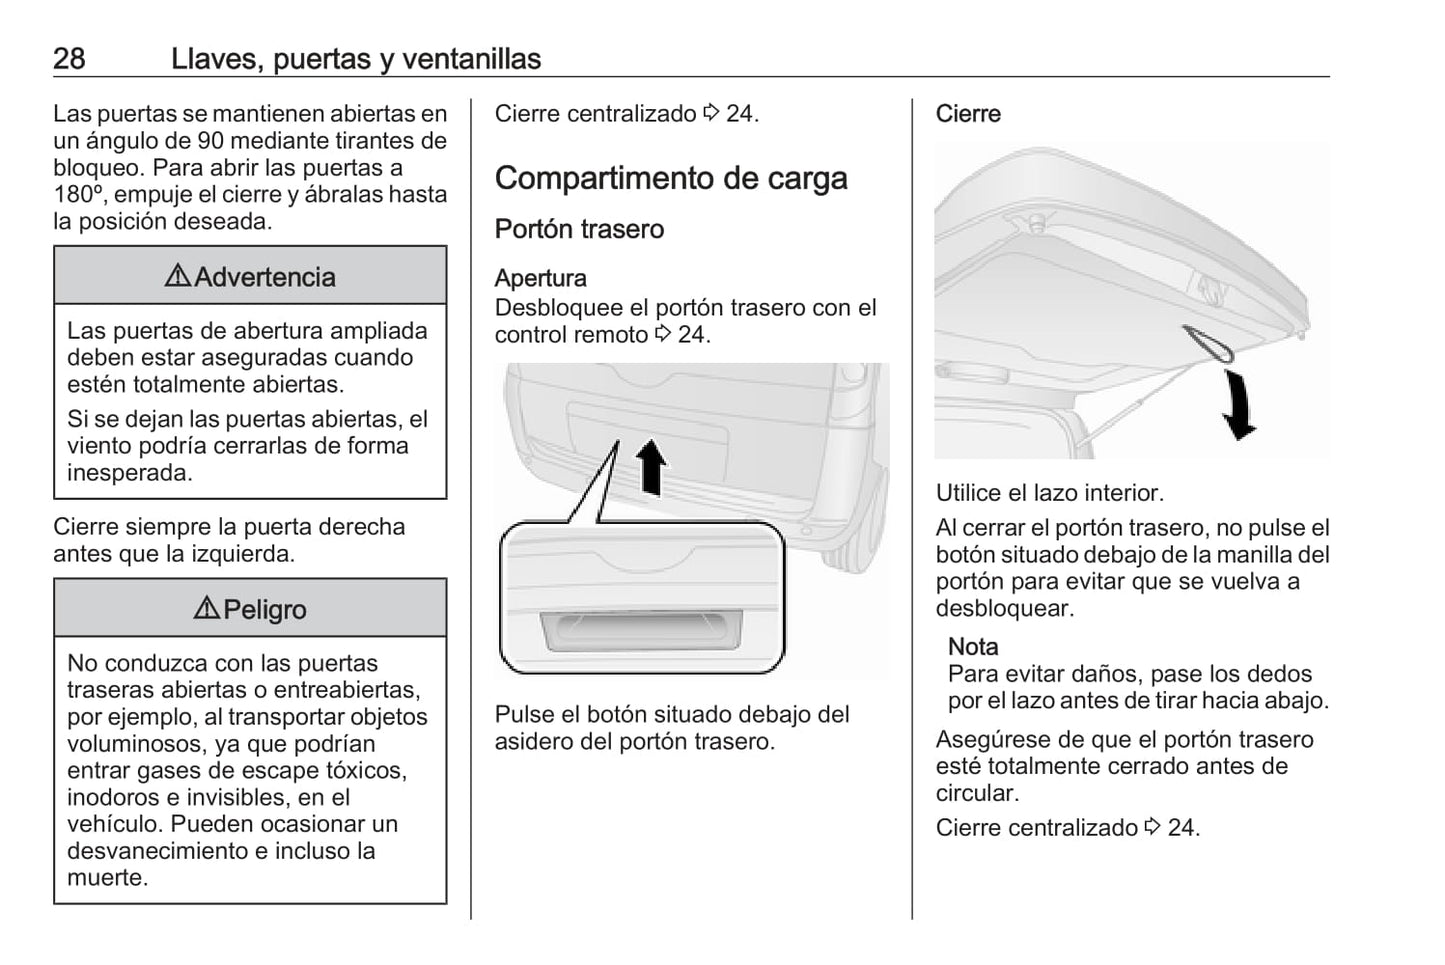 2017 Opel Combo Owner's Manual | Spanish